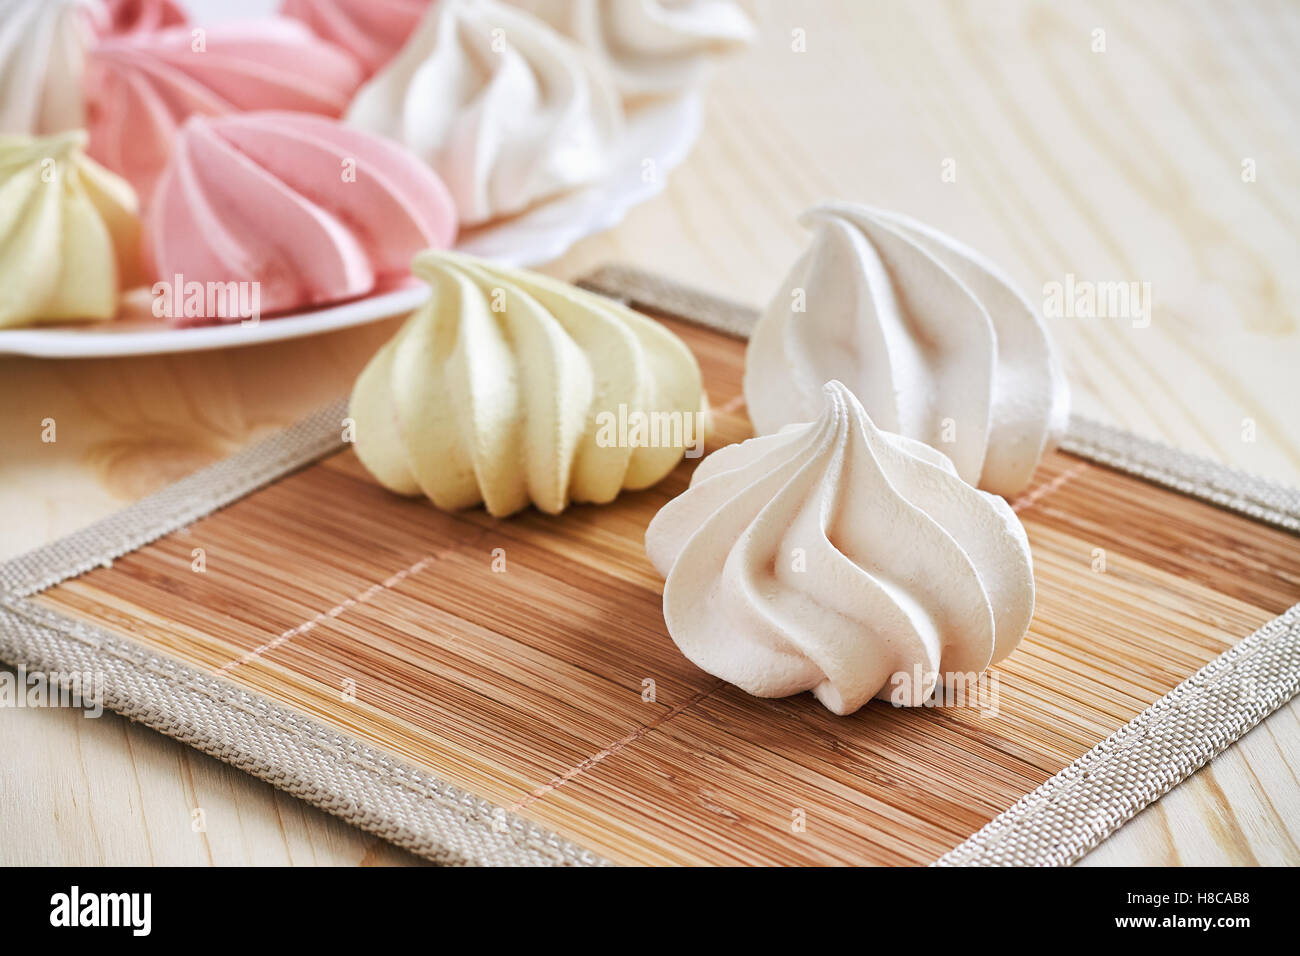 Fresh delicious colored meringue cookies on wooden table Stock Photo